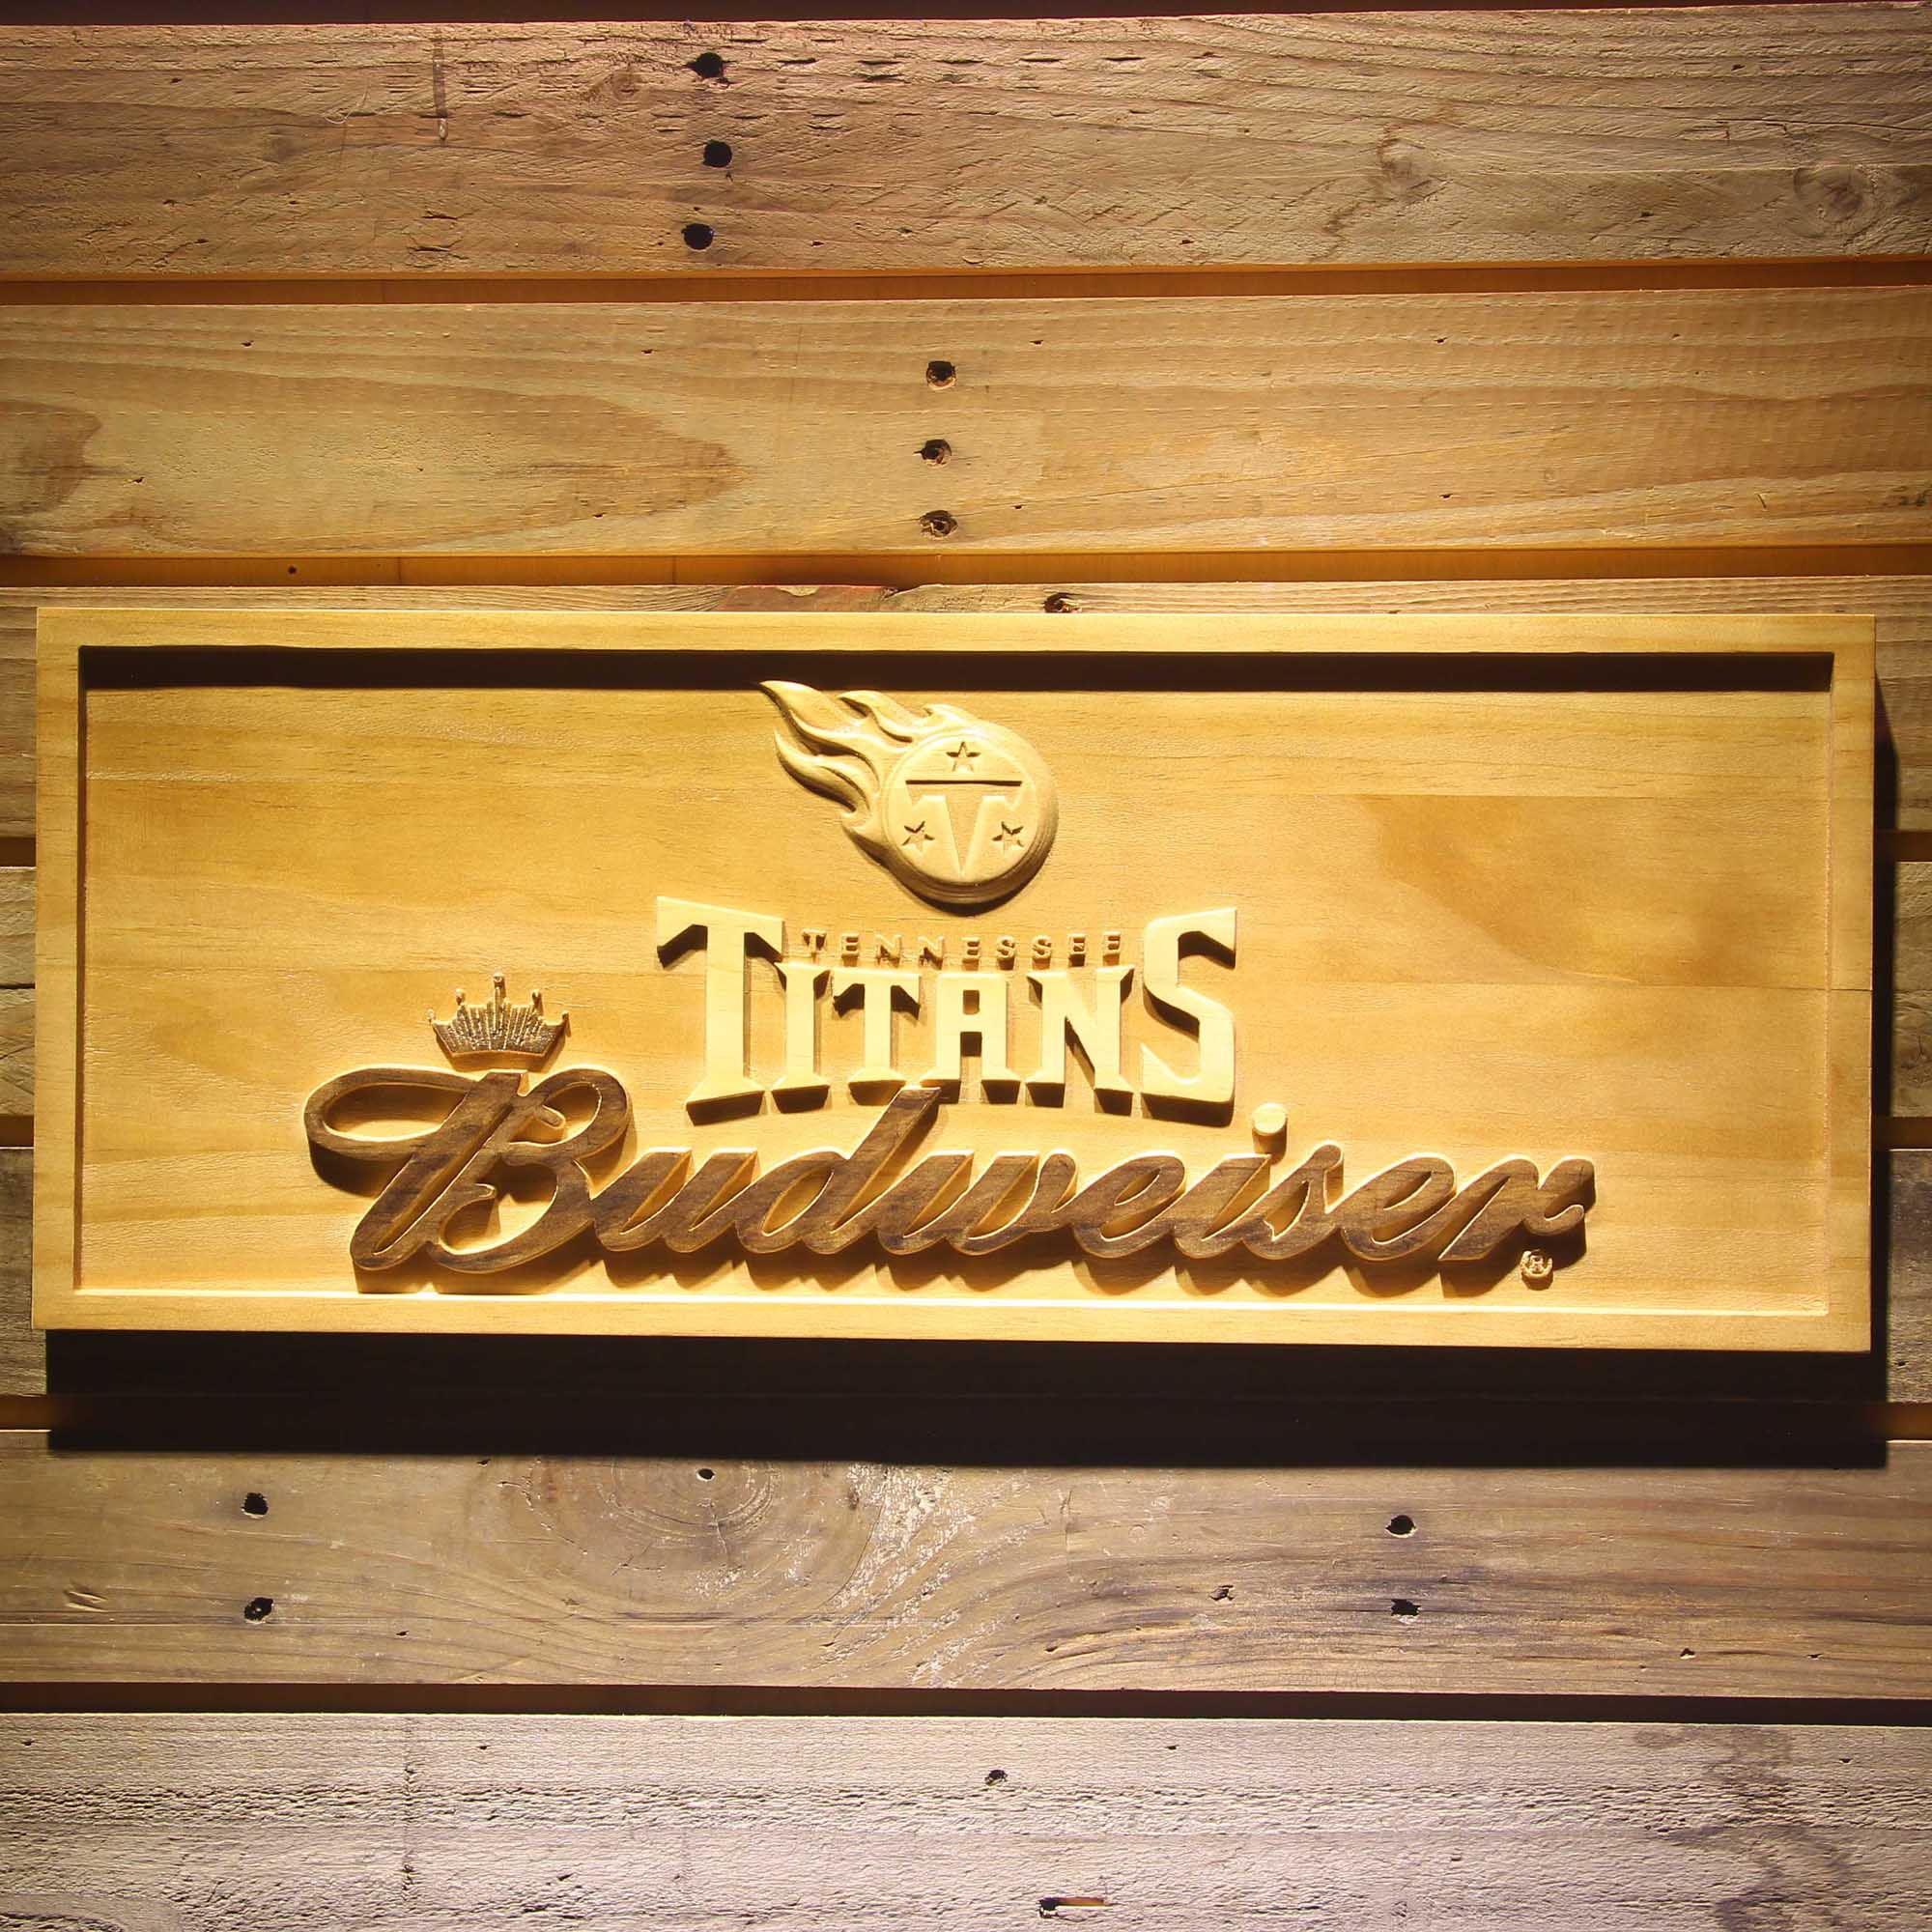 Tennessee Titans Budweiser 3D Wooden Engrave Sign